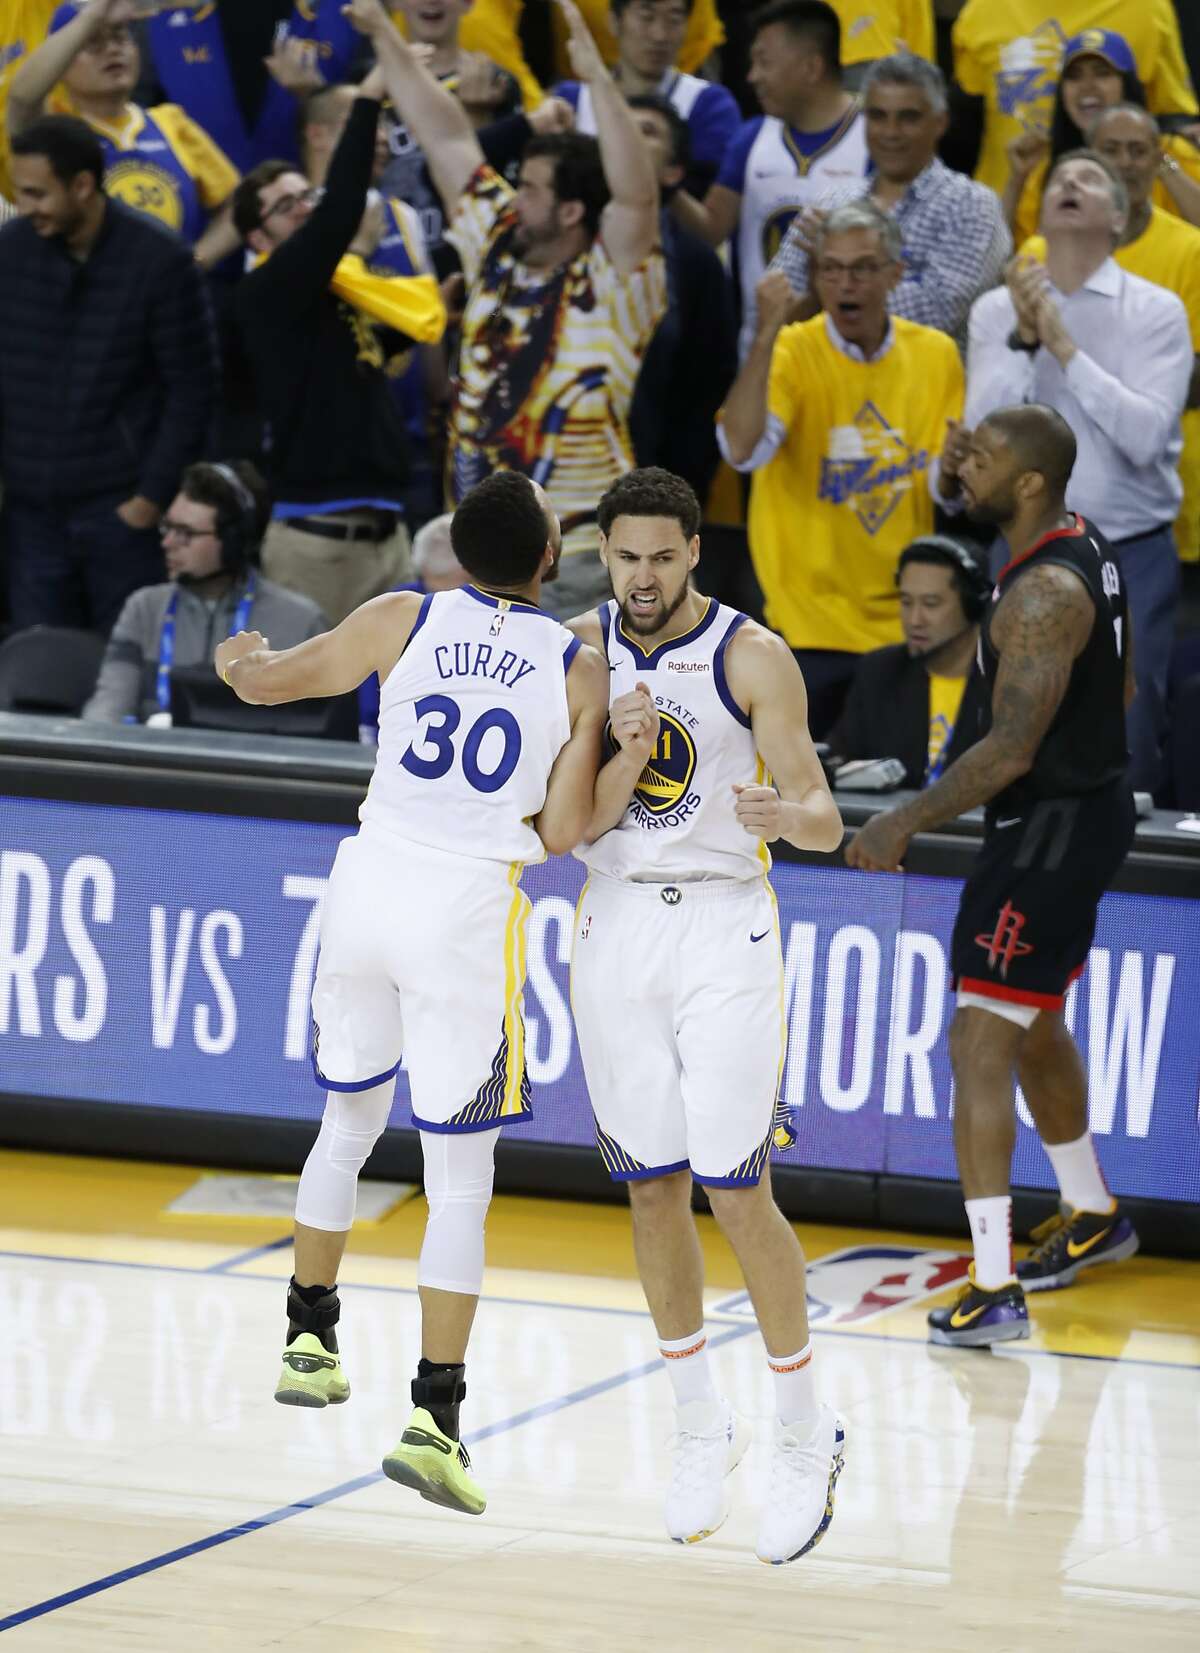 Golden State Warriors Stephen Curry and Klay Thompson react in the fourth quarter during game 5 of the Western Conference Semifinals between the Golden State Warriors and the Houston Rockets at Oracle Arena on Wednesday, May 8, 2019 in Oakland, Calif.